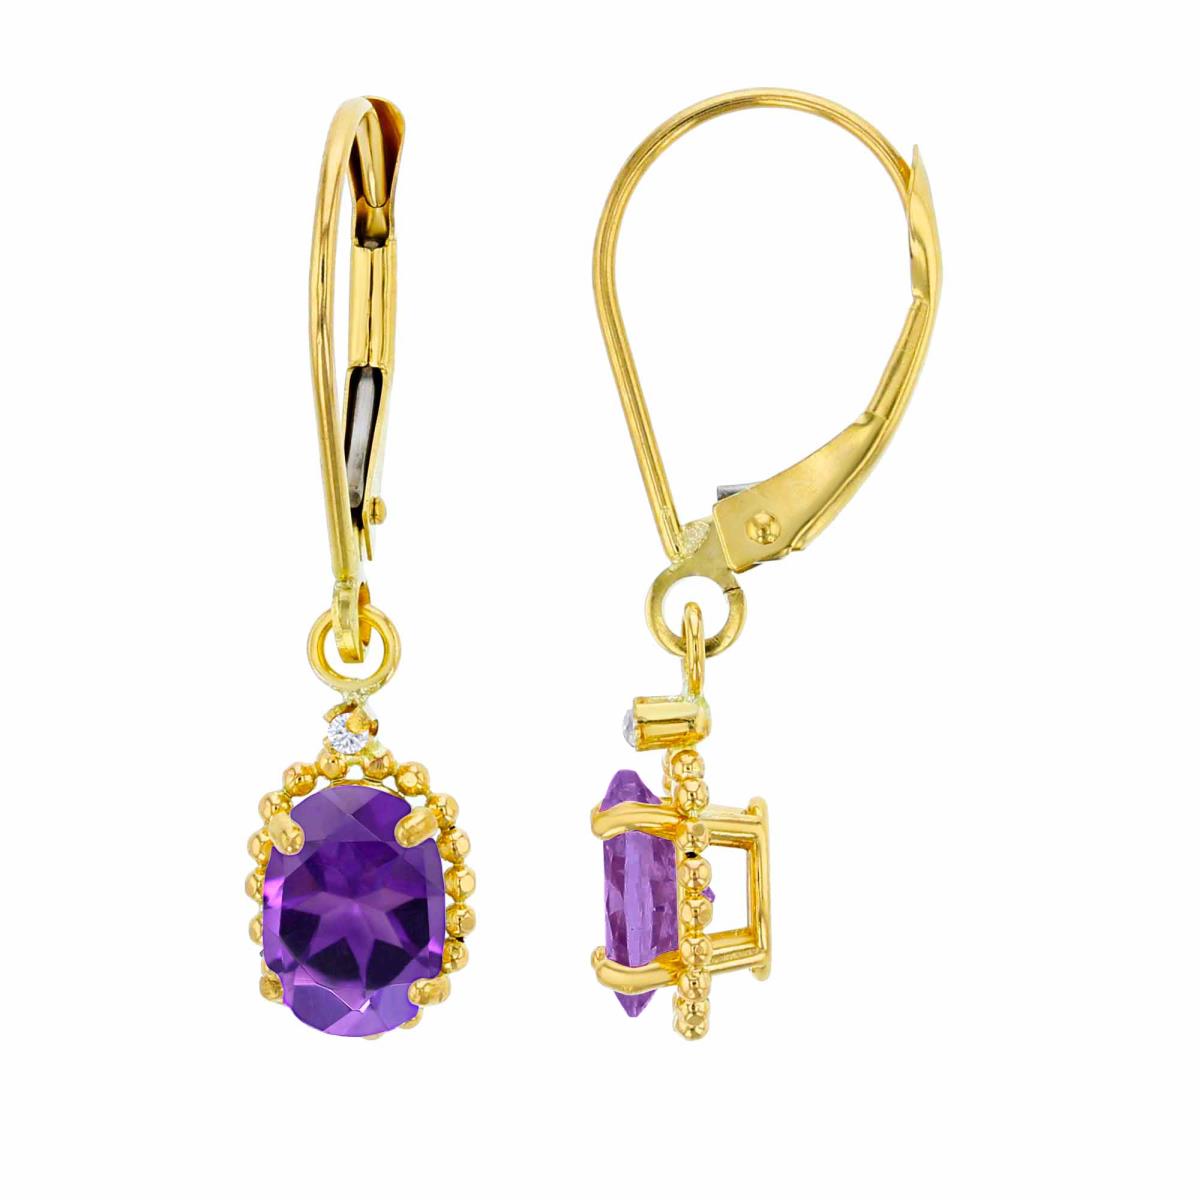 10K Yellow Gold 1.25mm Rd Created White Sapphire & 6x4mm Ov Amethyst Bead Frame Drop Lever-Back Earring